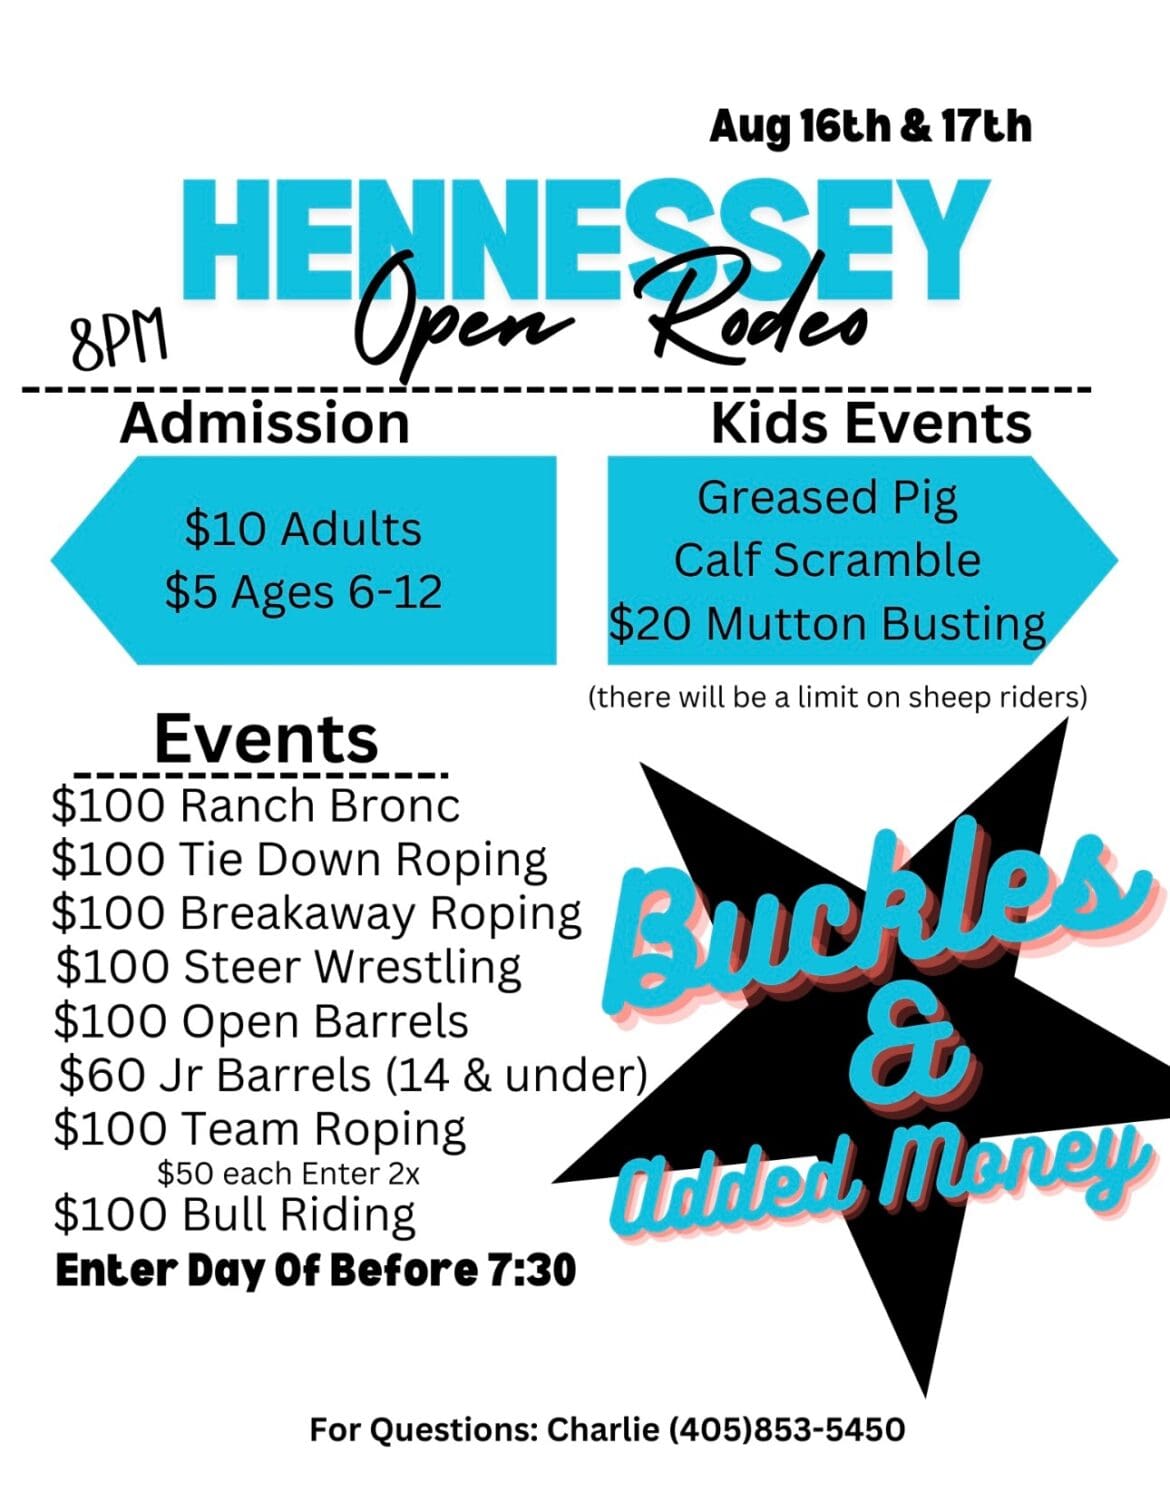 Hennessey Open Rodeo Aug 16 & 17